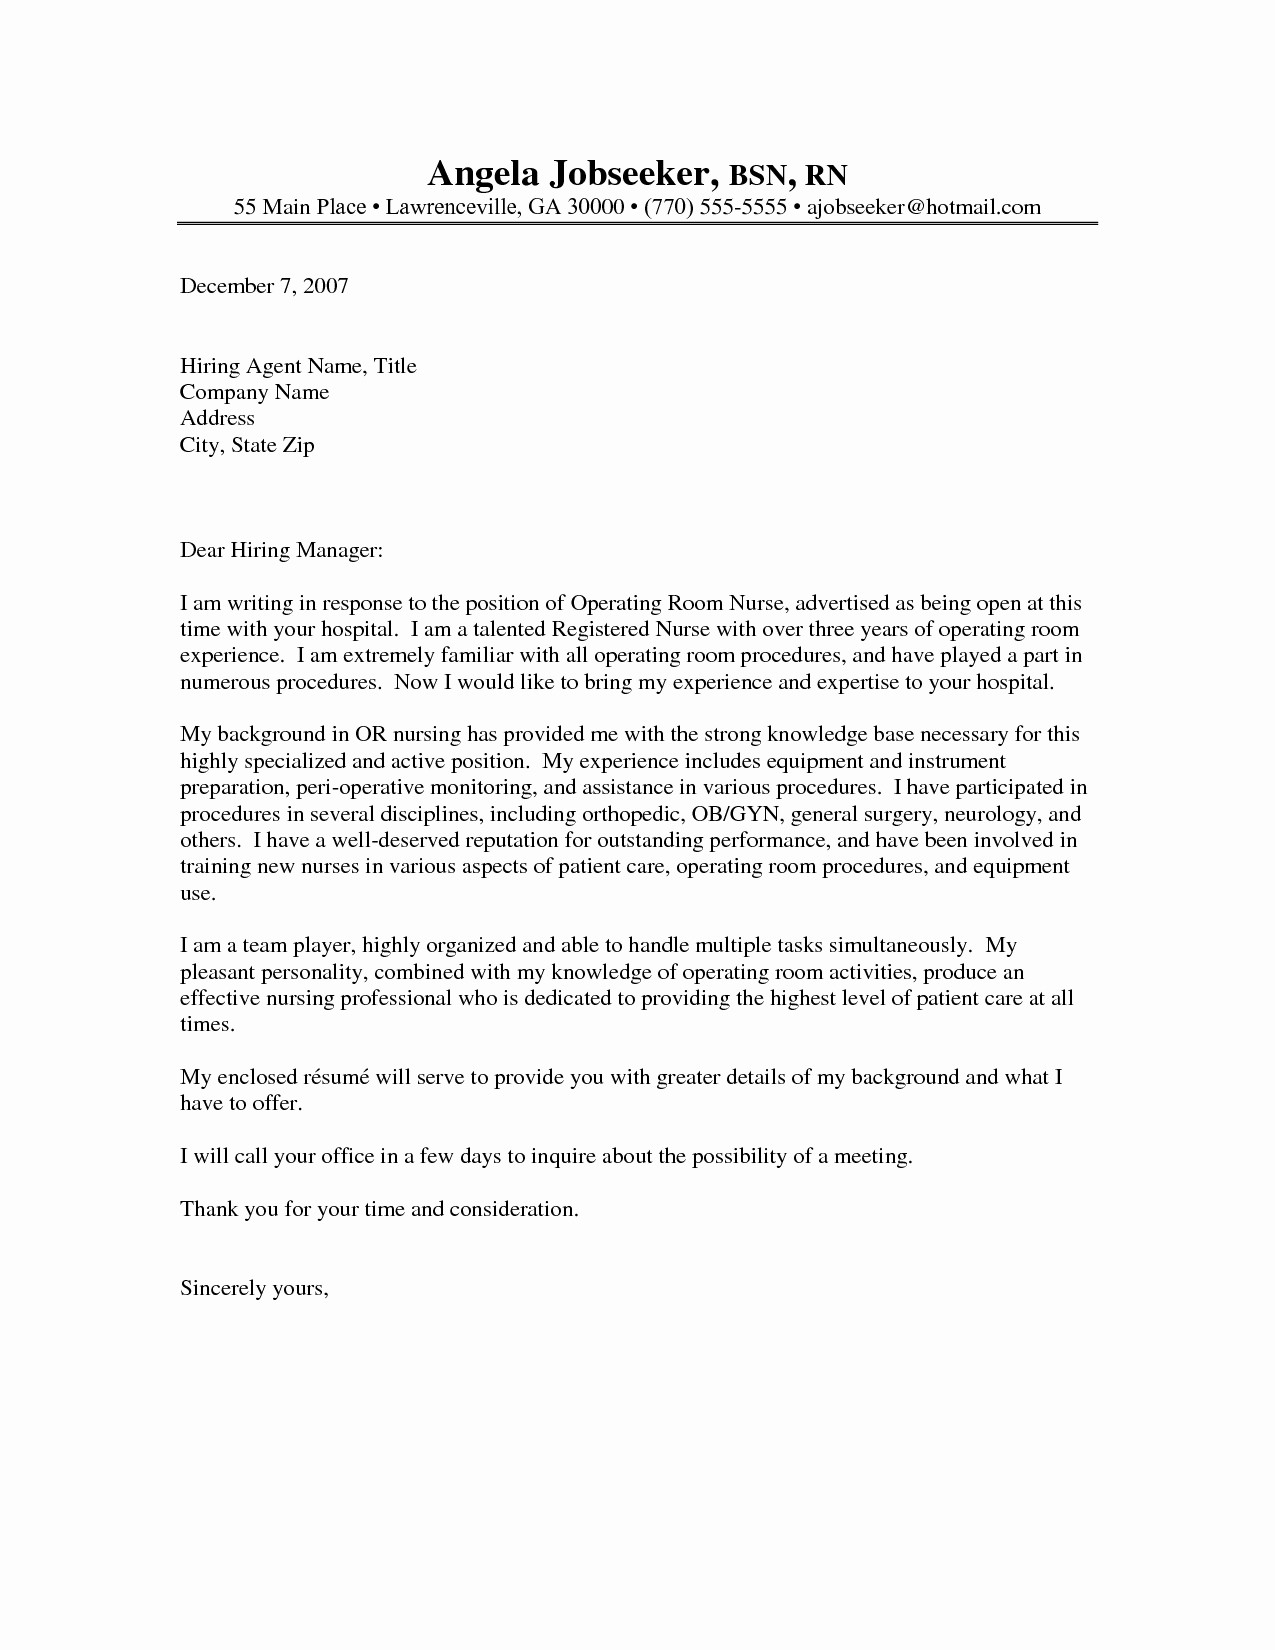 Resume and Cover Letter Template Best Of Good Cover Letter Examples